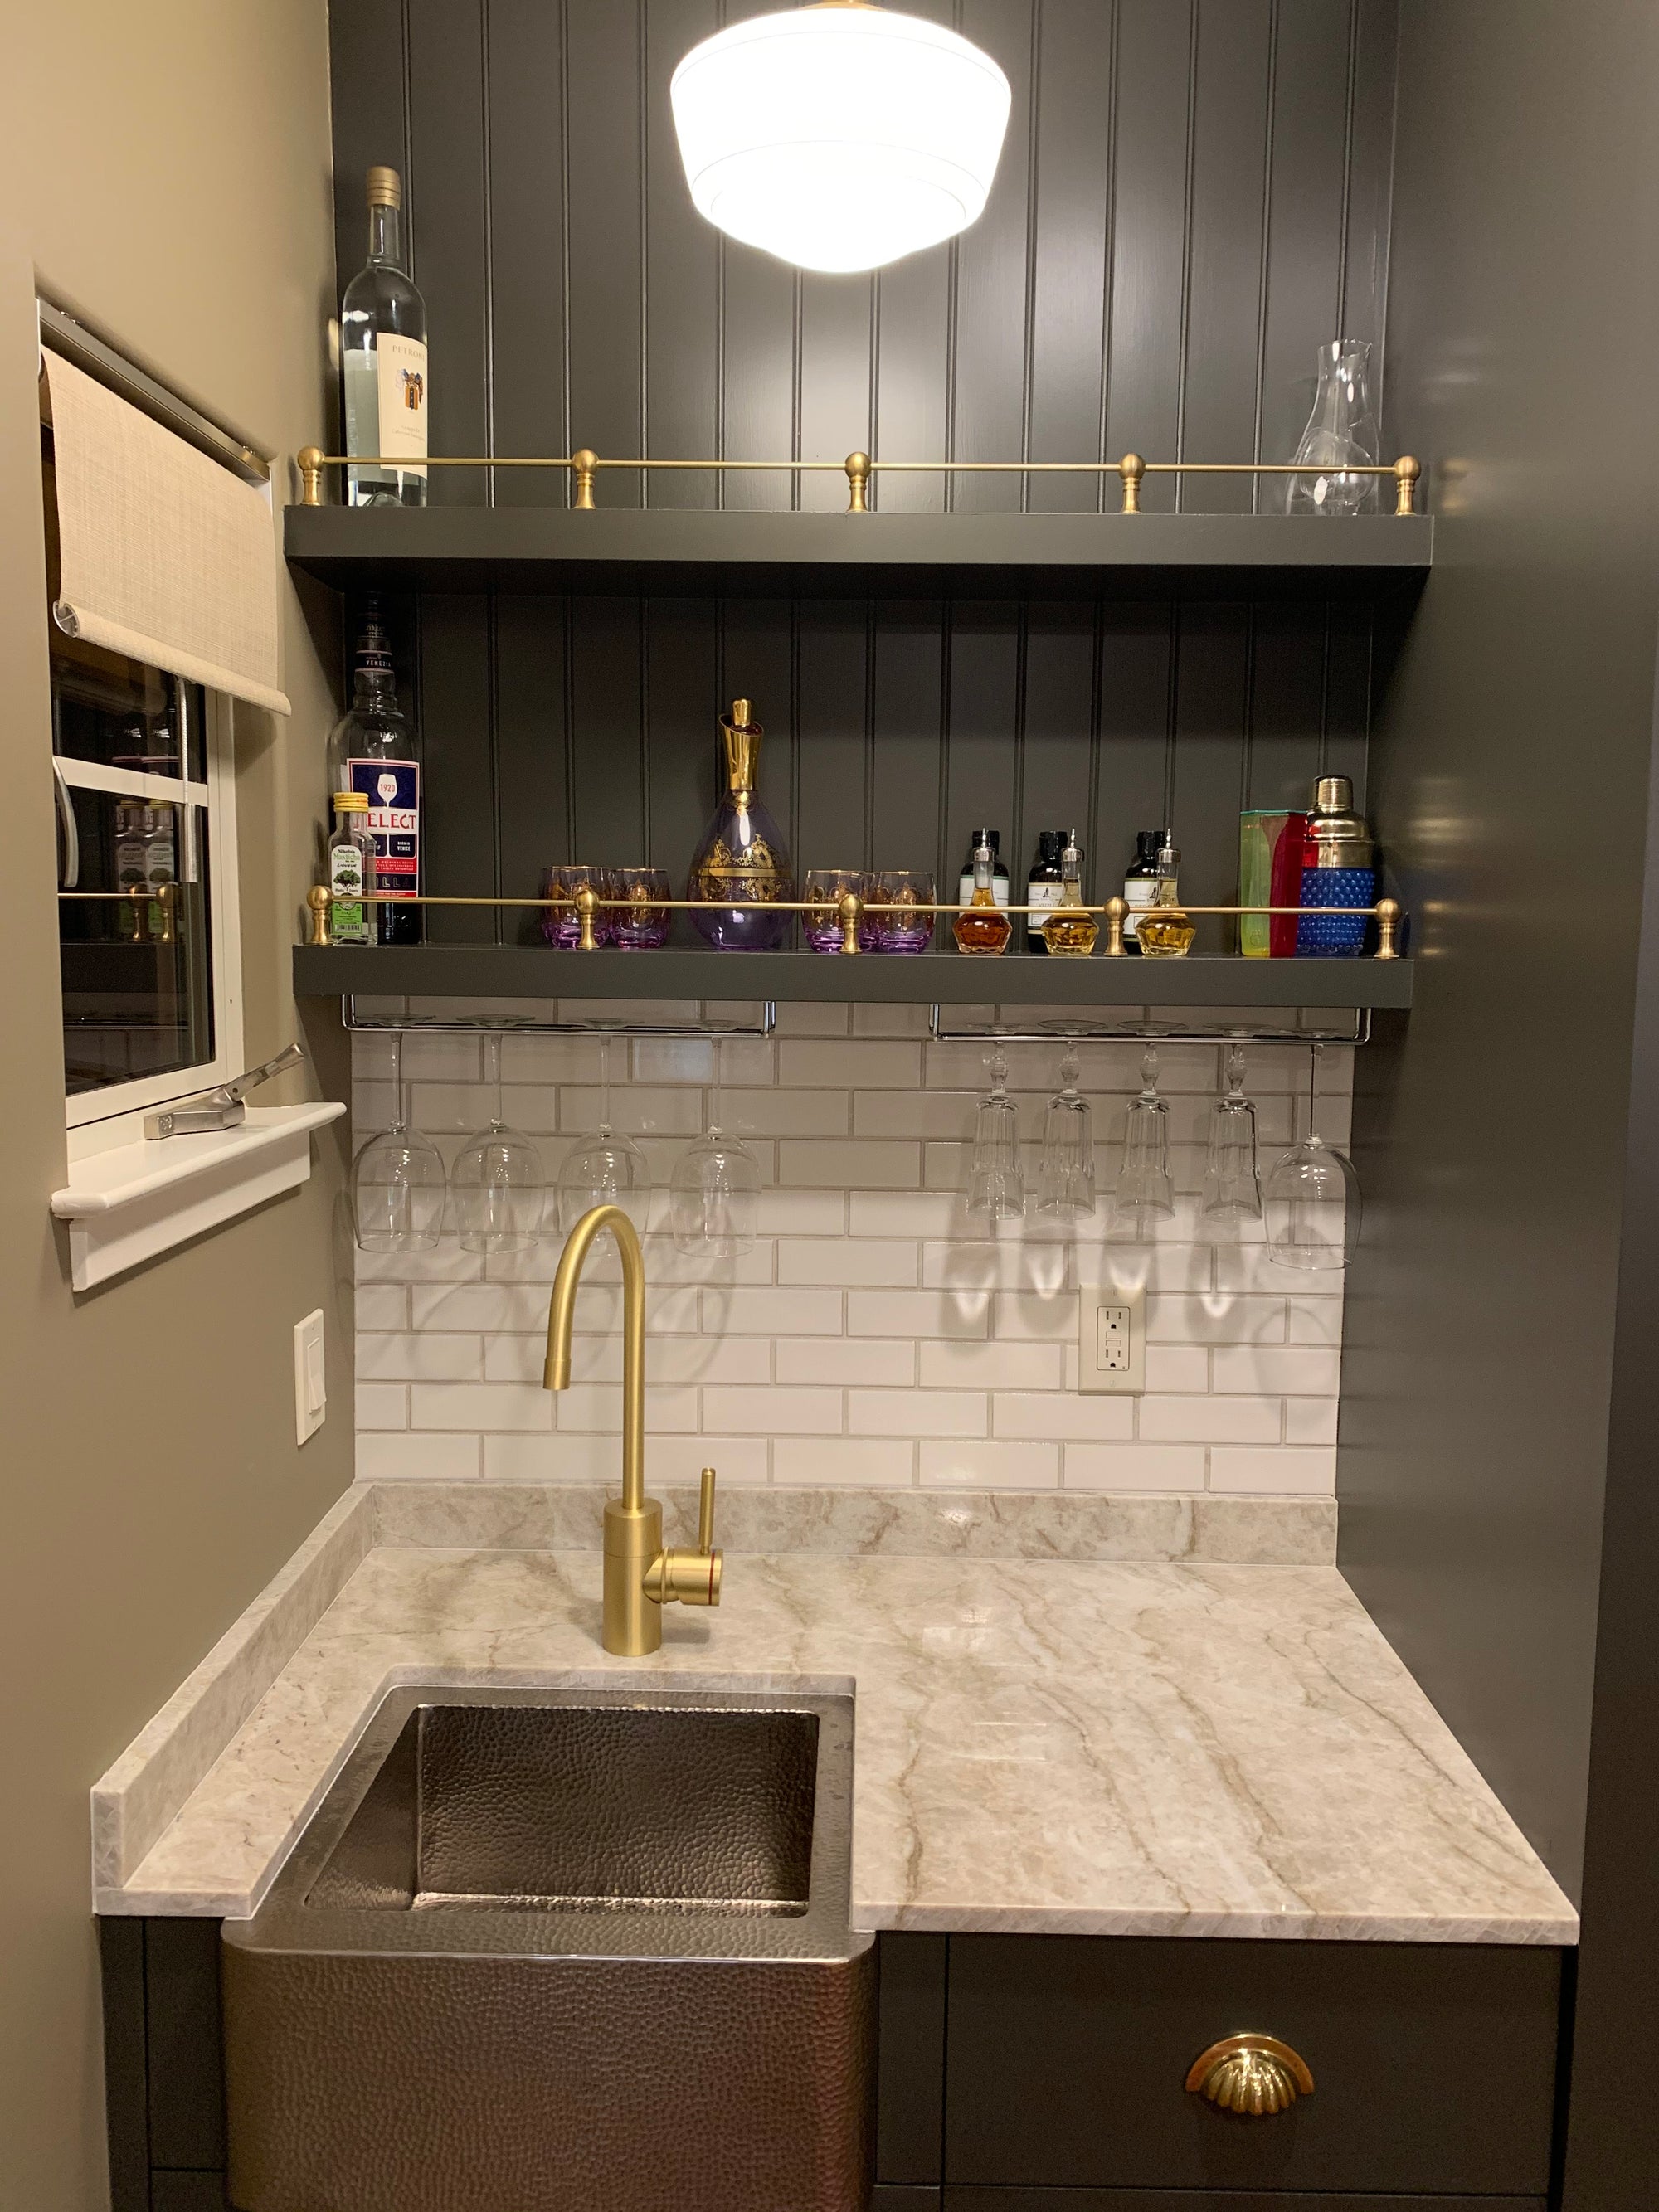 Brass Gallery Rail over pantry sink